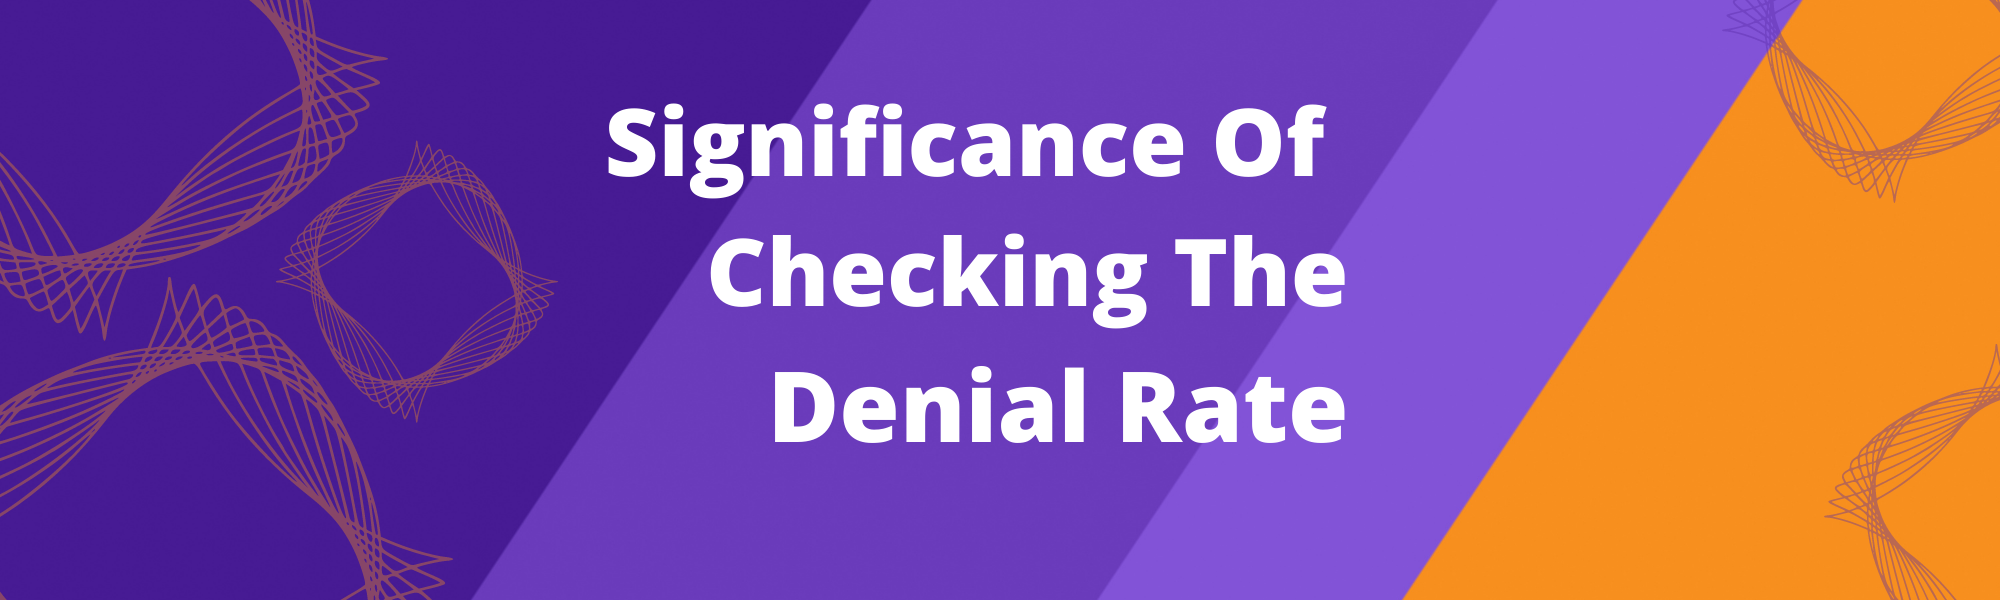 Significance Of Checking The Denial Rate